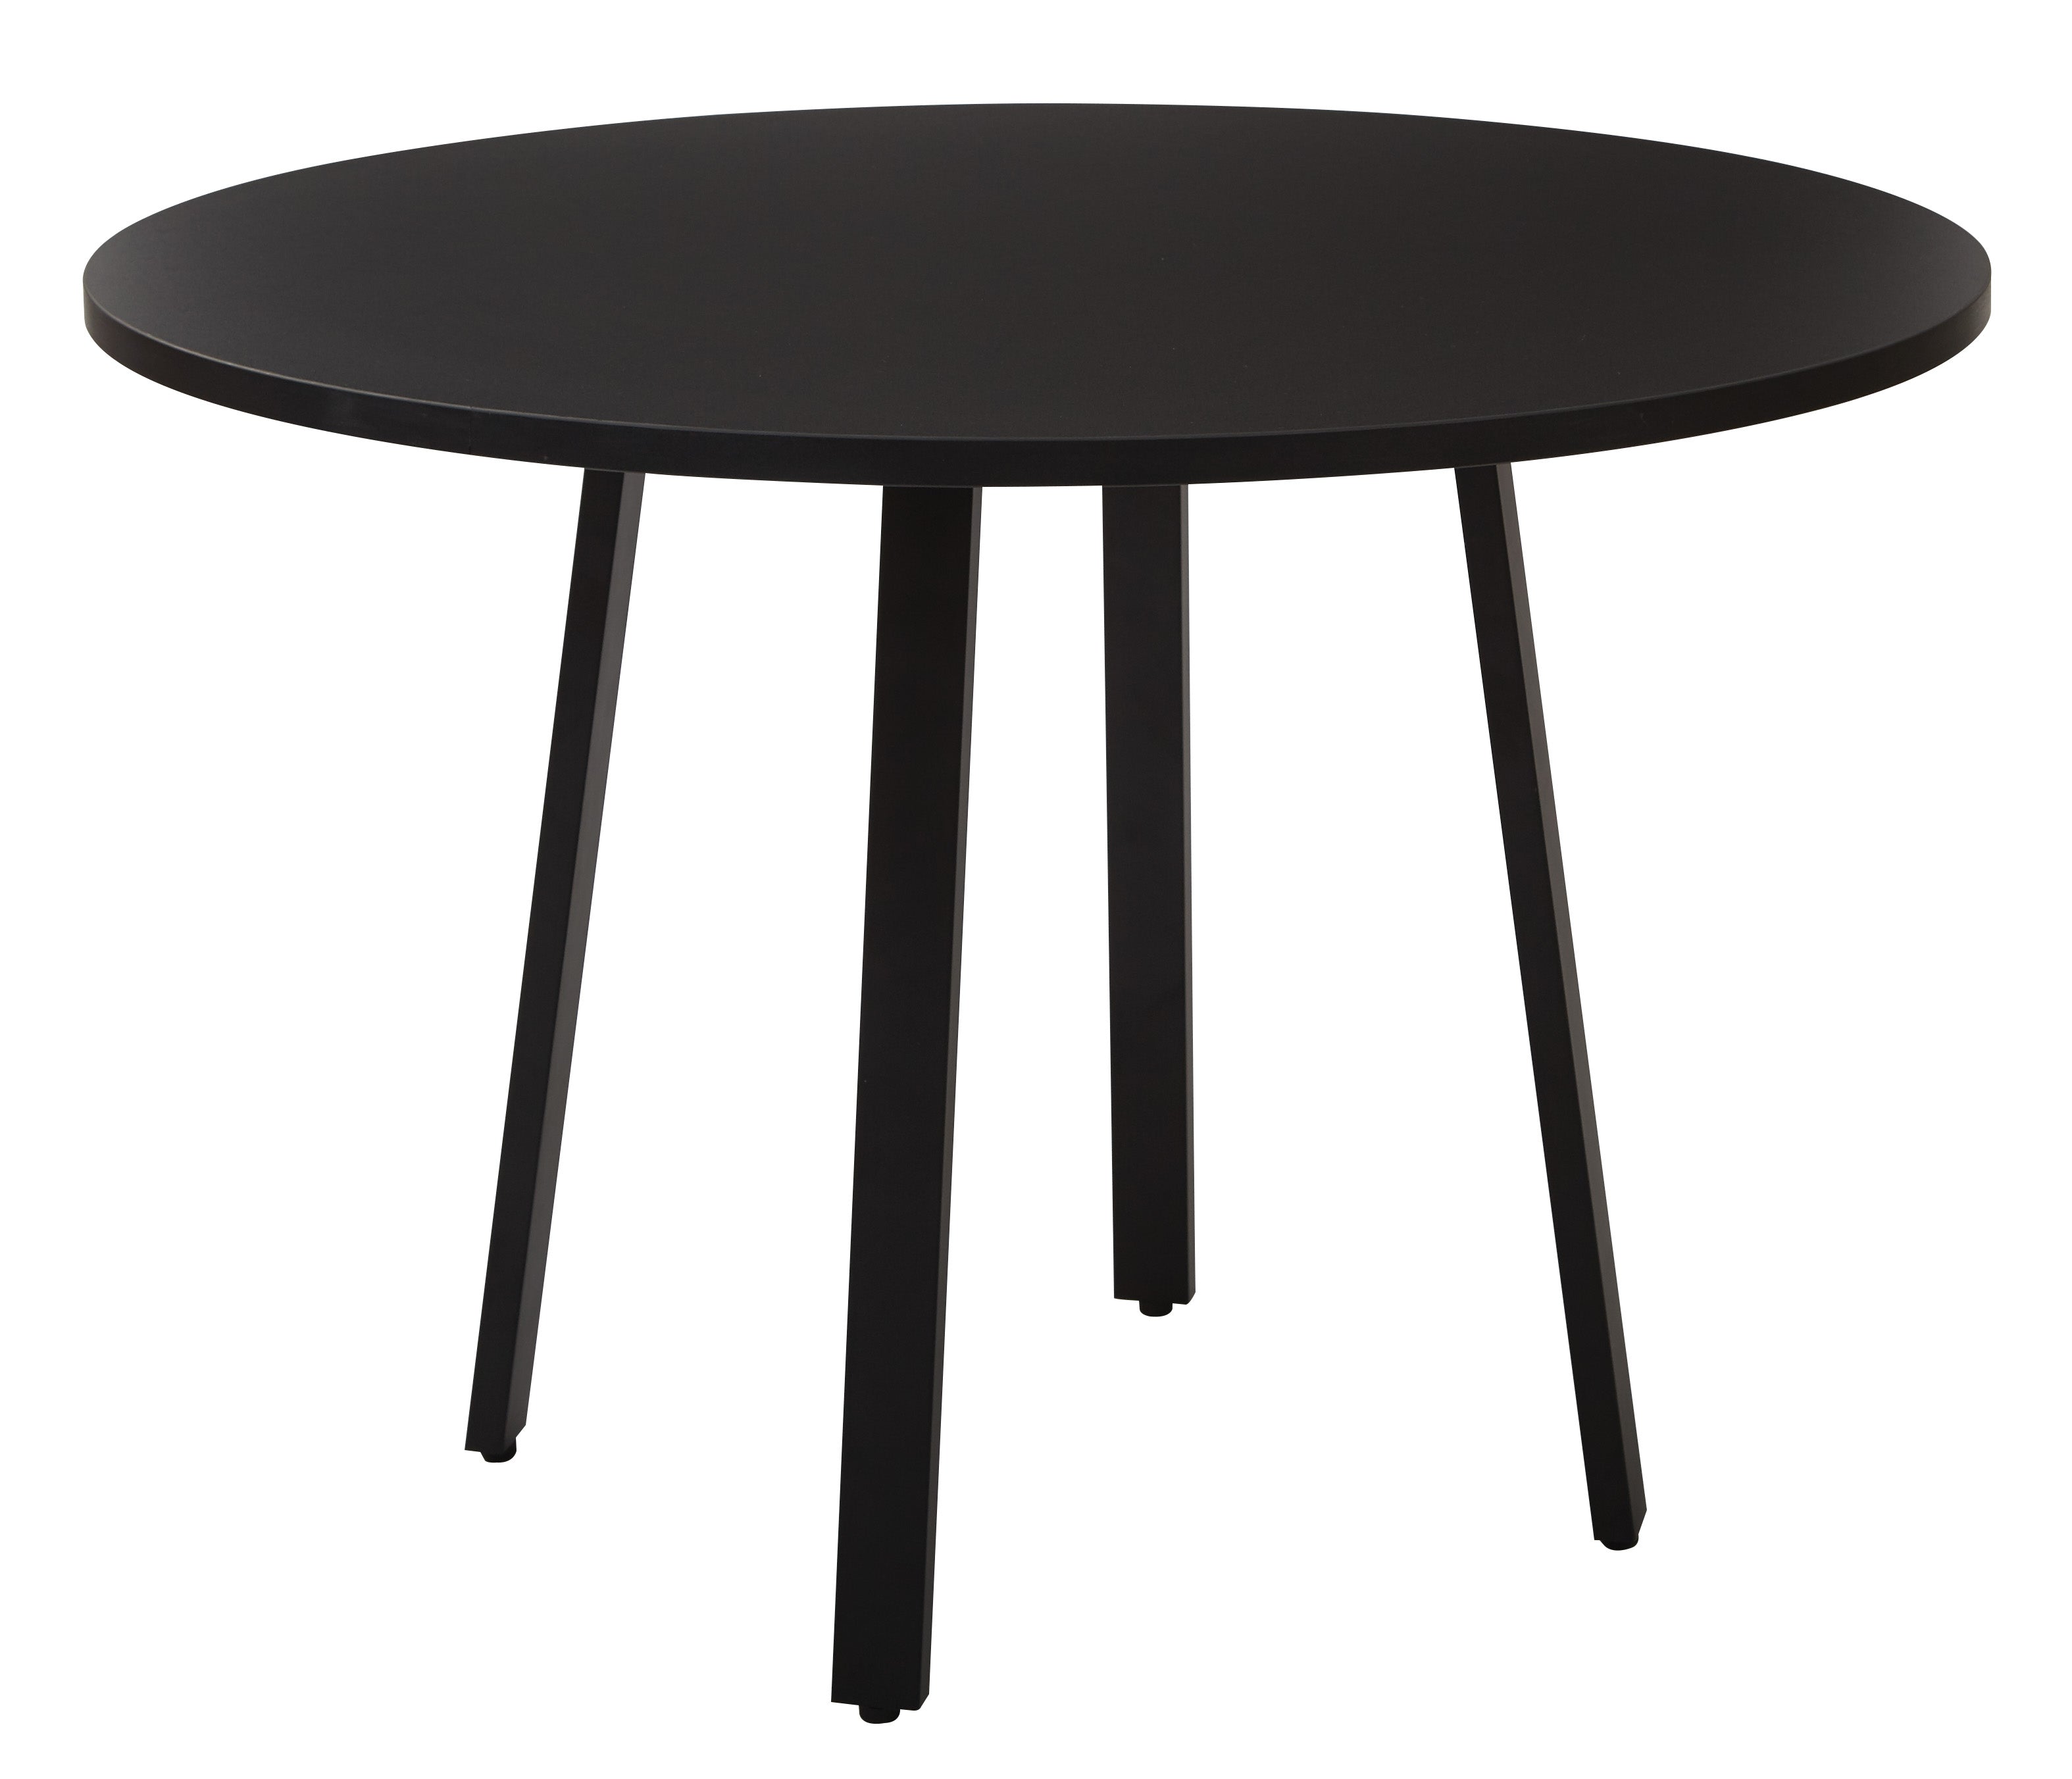 Prado 42" Round Conference Table with Black laminate Top and Black Finish Metal Legs